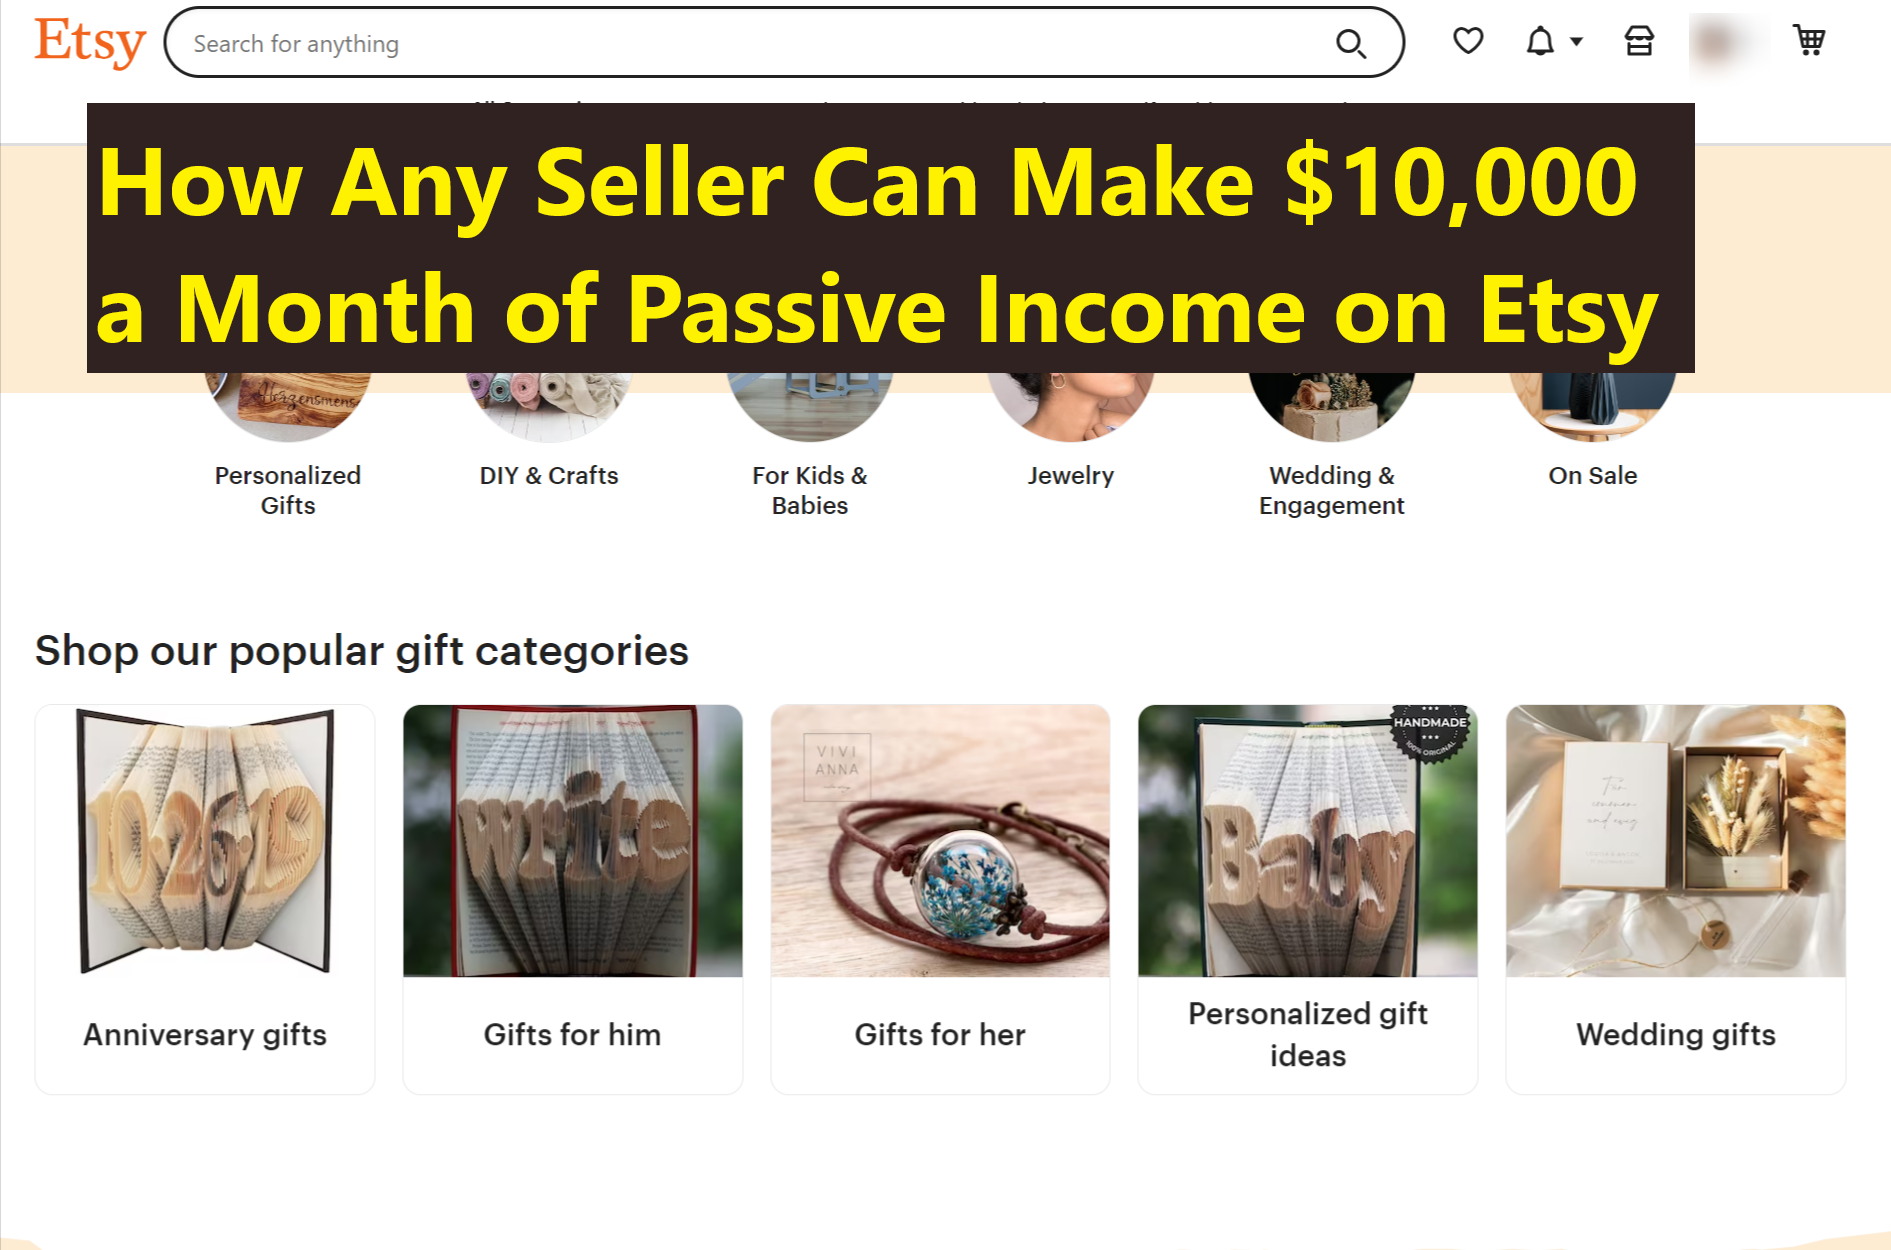 How Any Seller Can Make 10000 a Month of Passive Income on Etsy Etsy: How Any Seller Can Make $10,000 a Month of Passive Income on Etsy